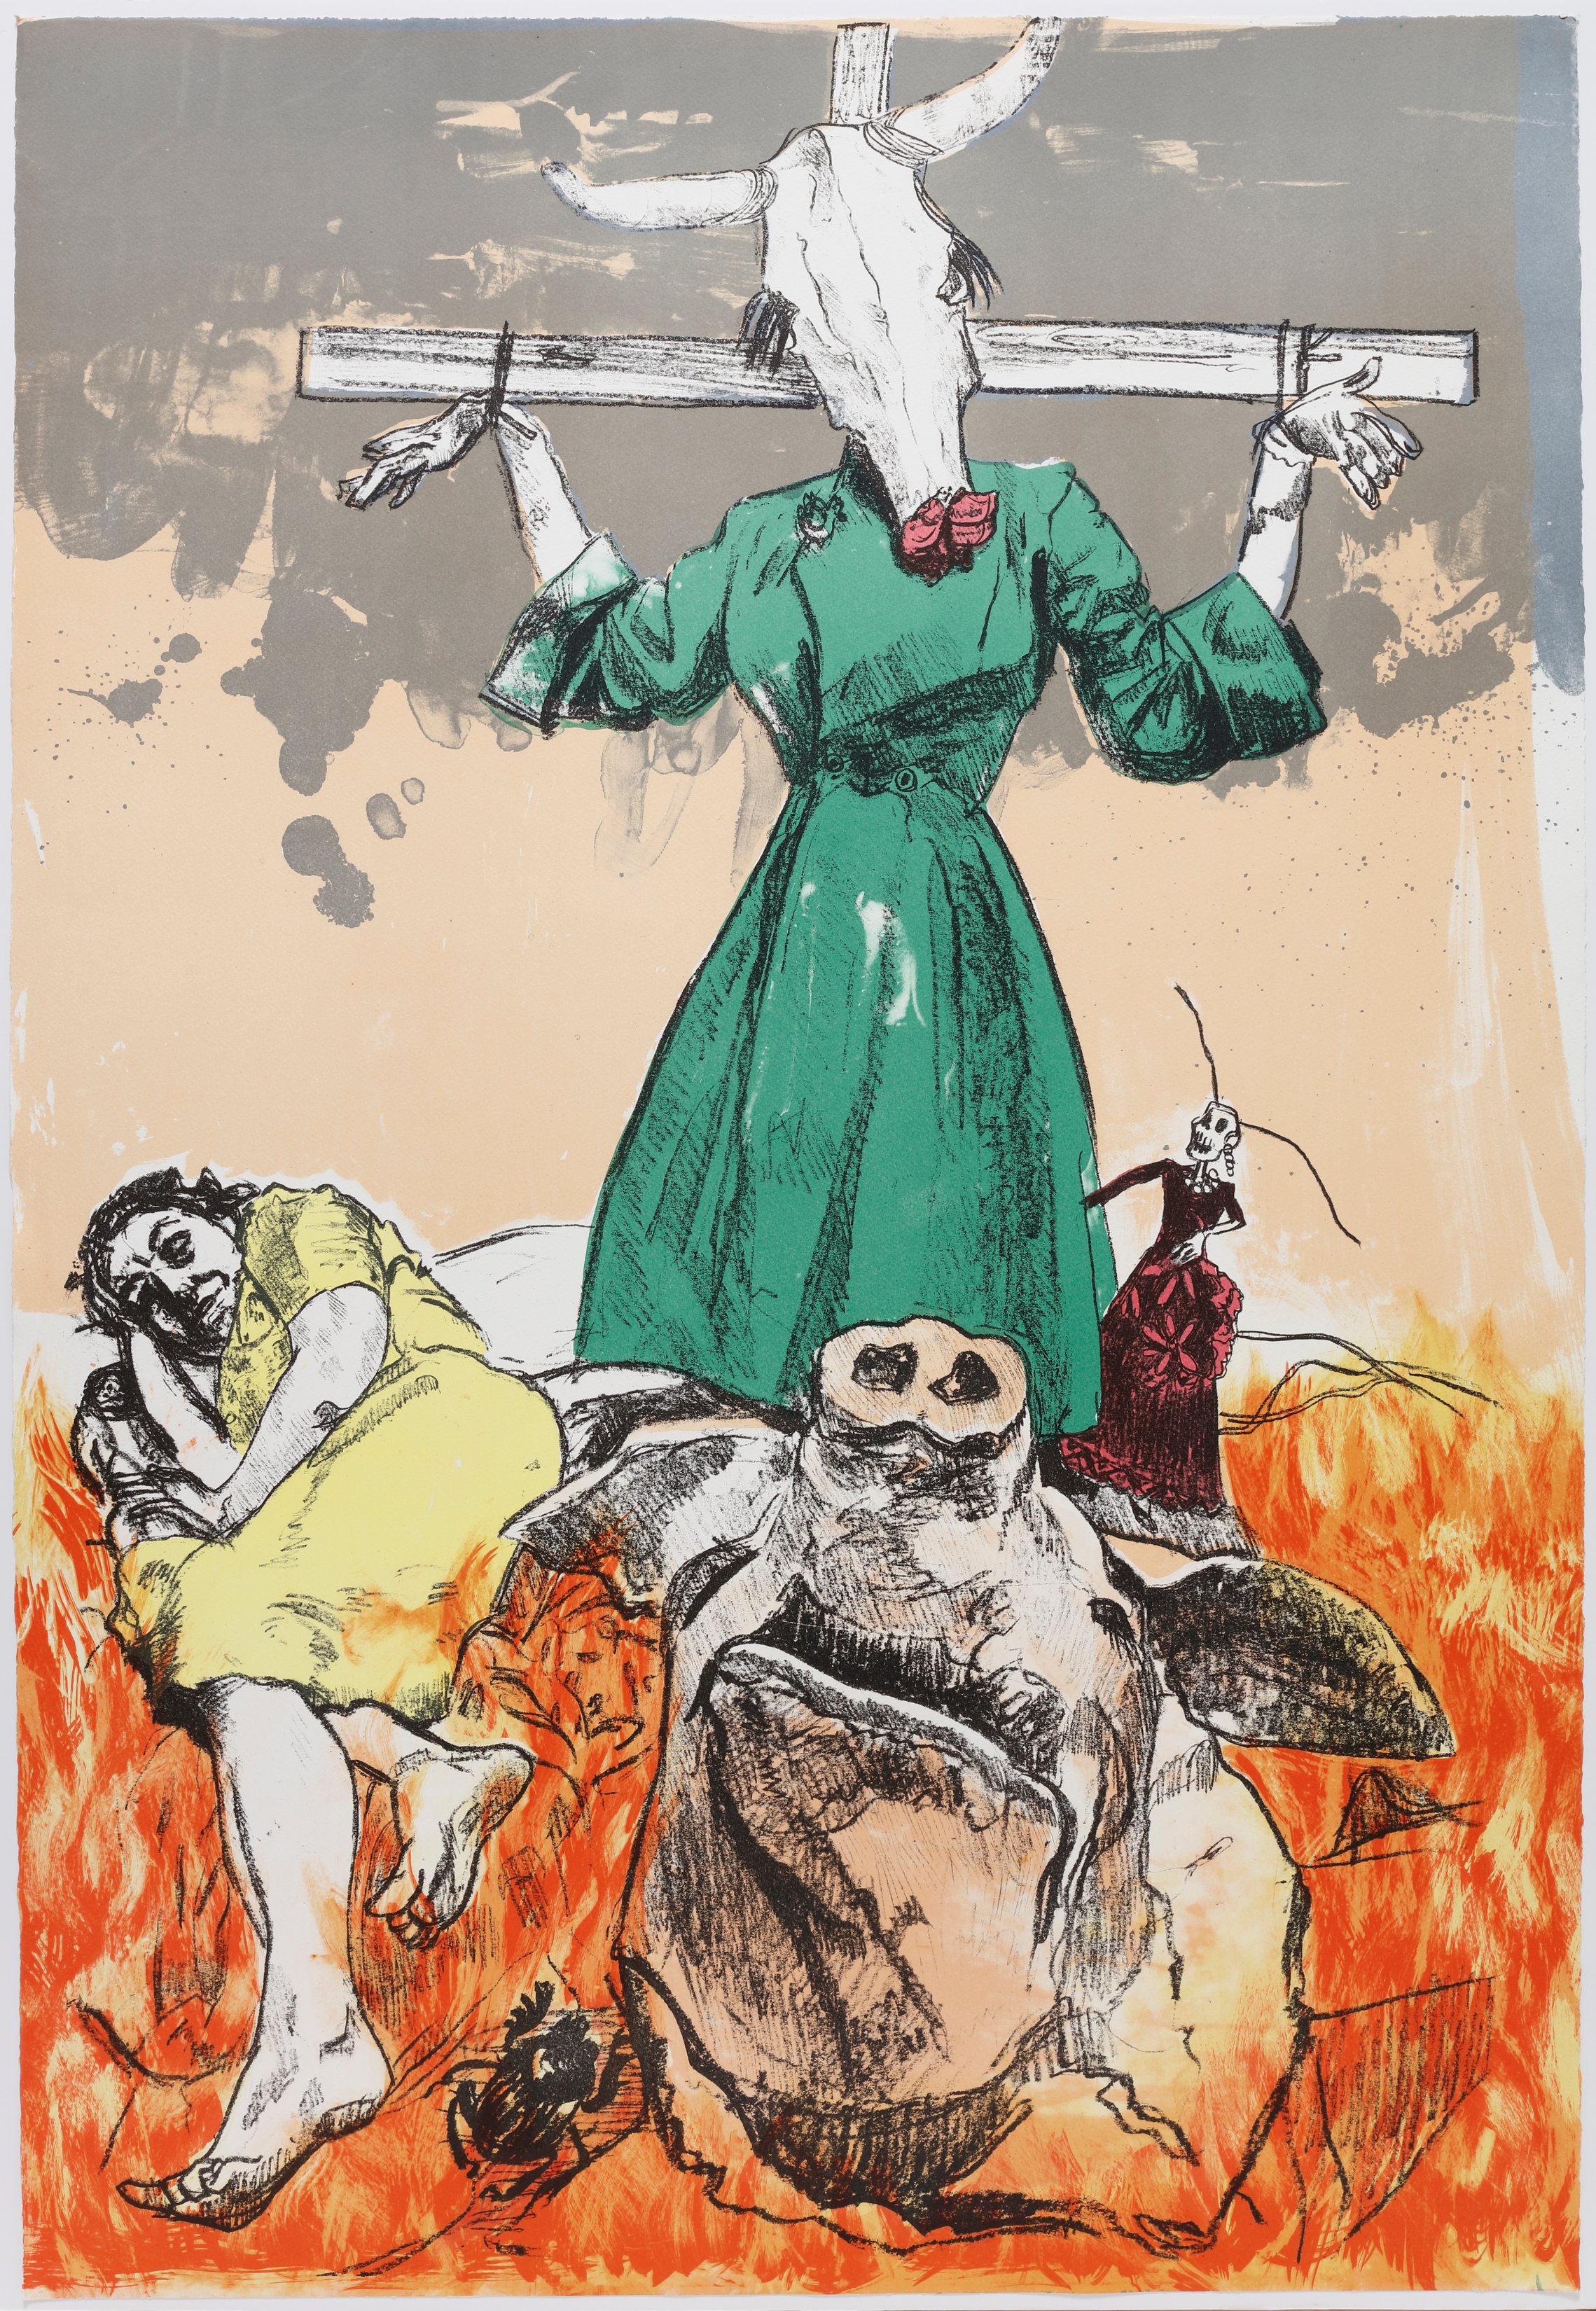 Rego, Scarecrow, 2006, lithograph, edition of 35, 40 x 28 1-8 in., 101.5 x 68.8 cm